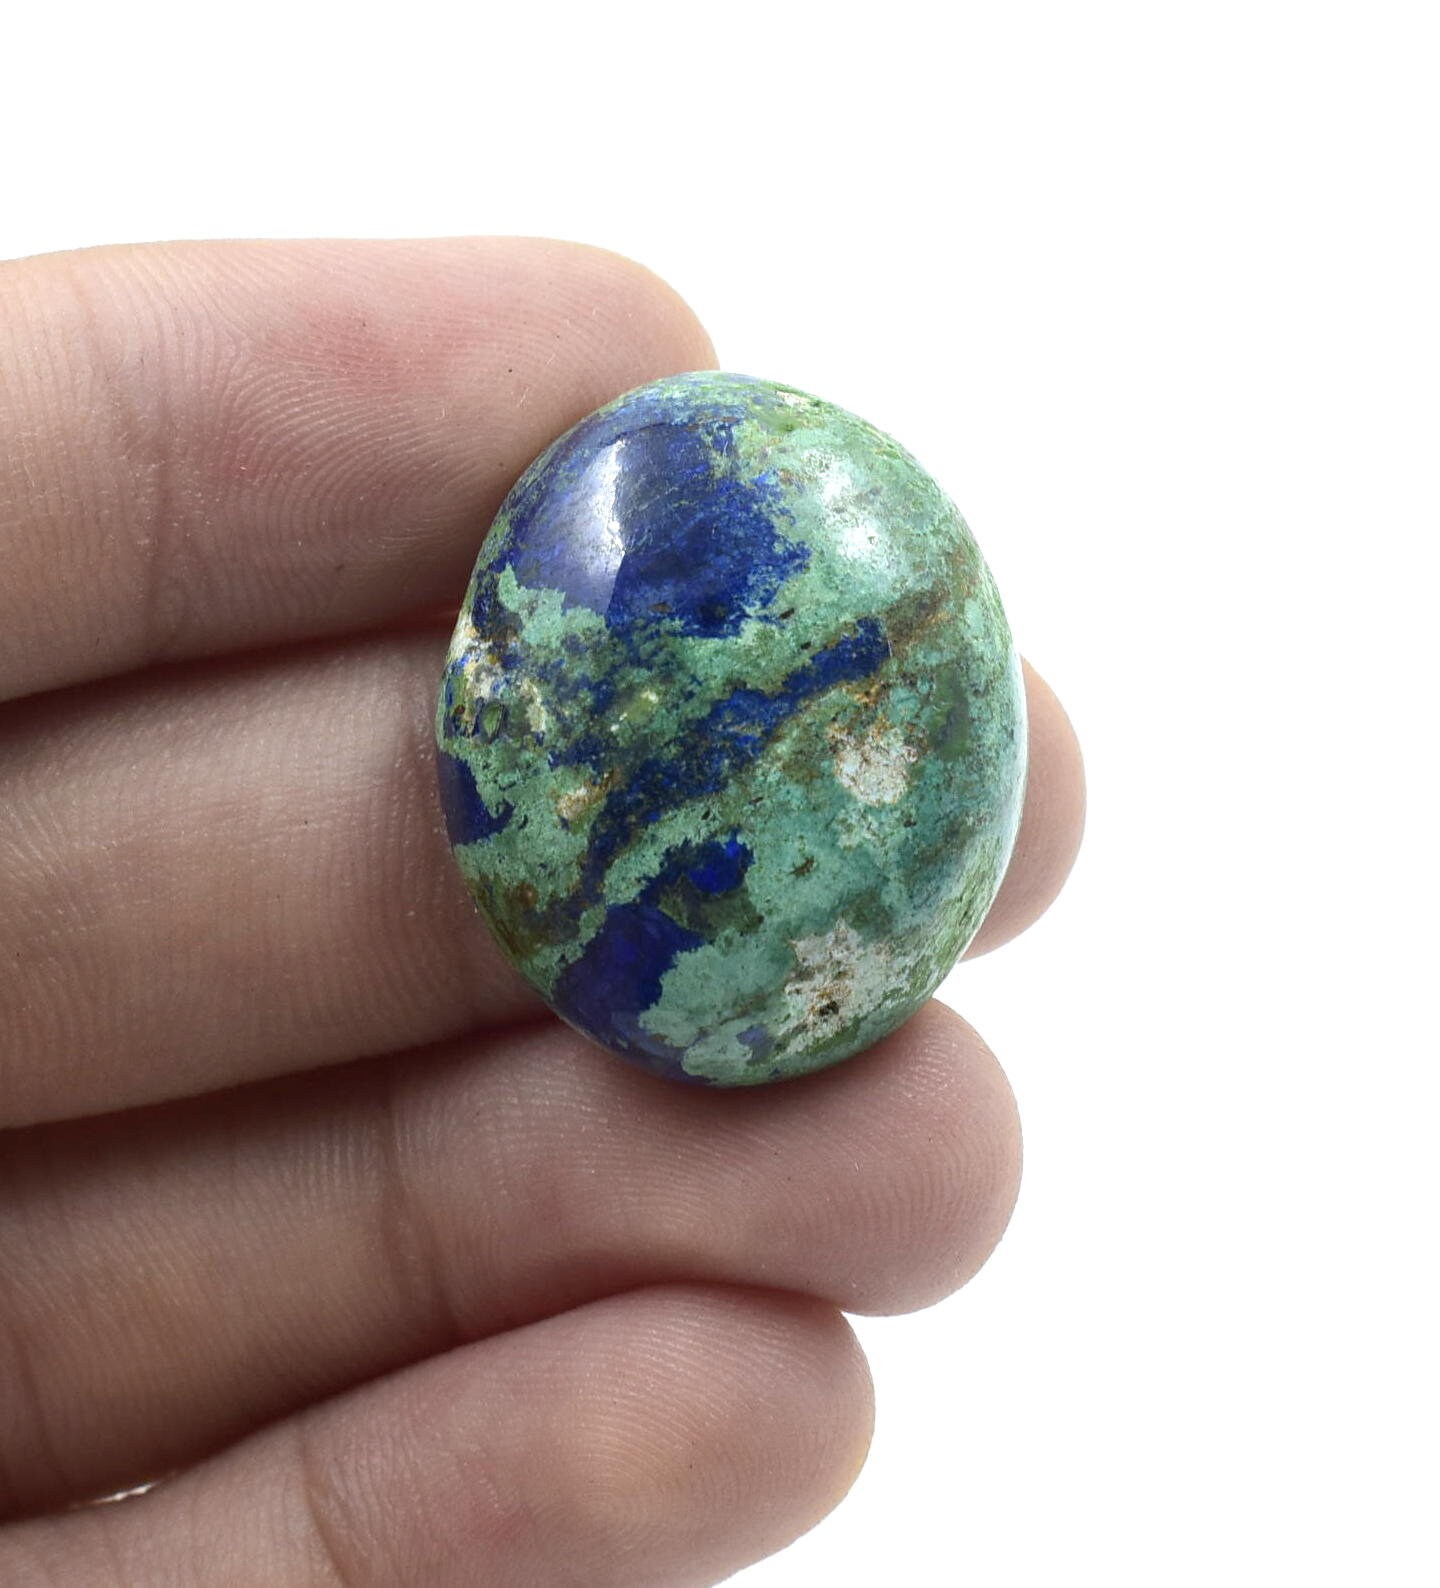 100% Natural Azurite Malachite Cabochon Good quality stone Beautiful Art Making for jewellery Ring 44.50 CARAT 26X22 MM | Save 33% - Rajasthan Living 11